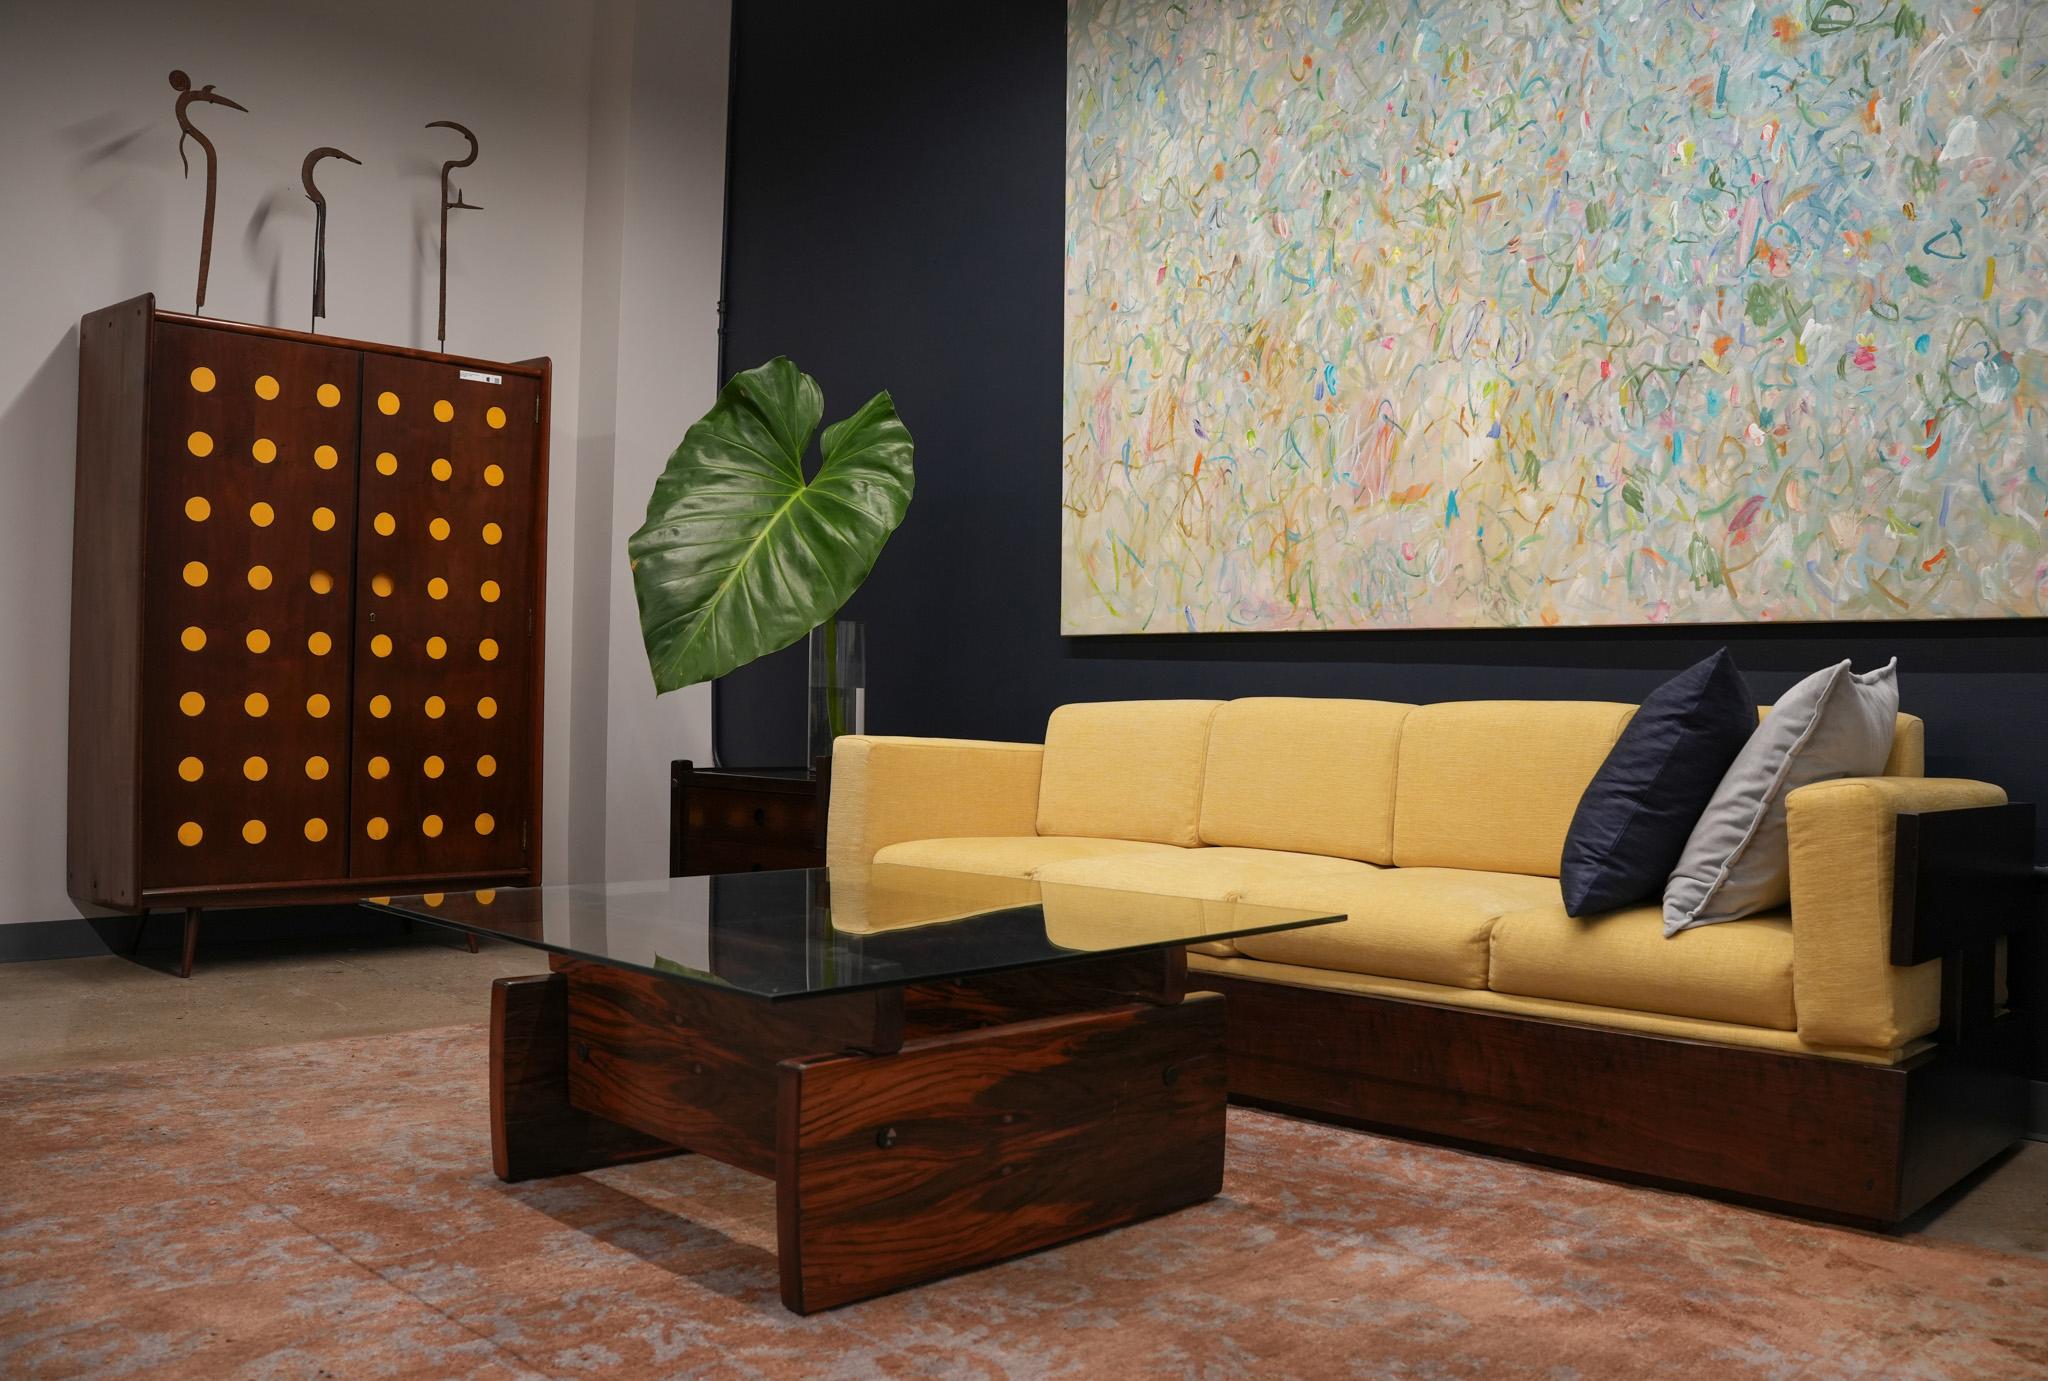 Brazilian Modern Sofa in Hardwood and Yellow Chenille by Celina, Brazil, c. 1960 For Sale 1